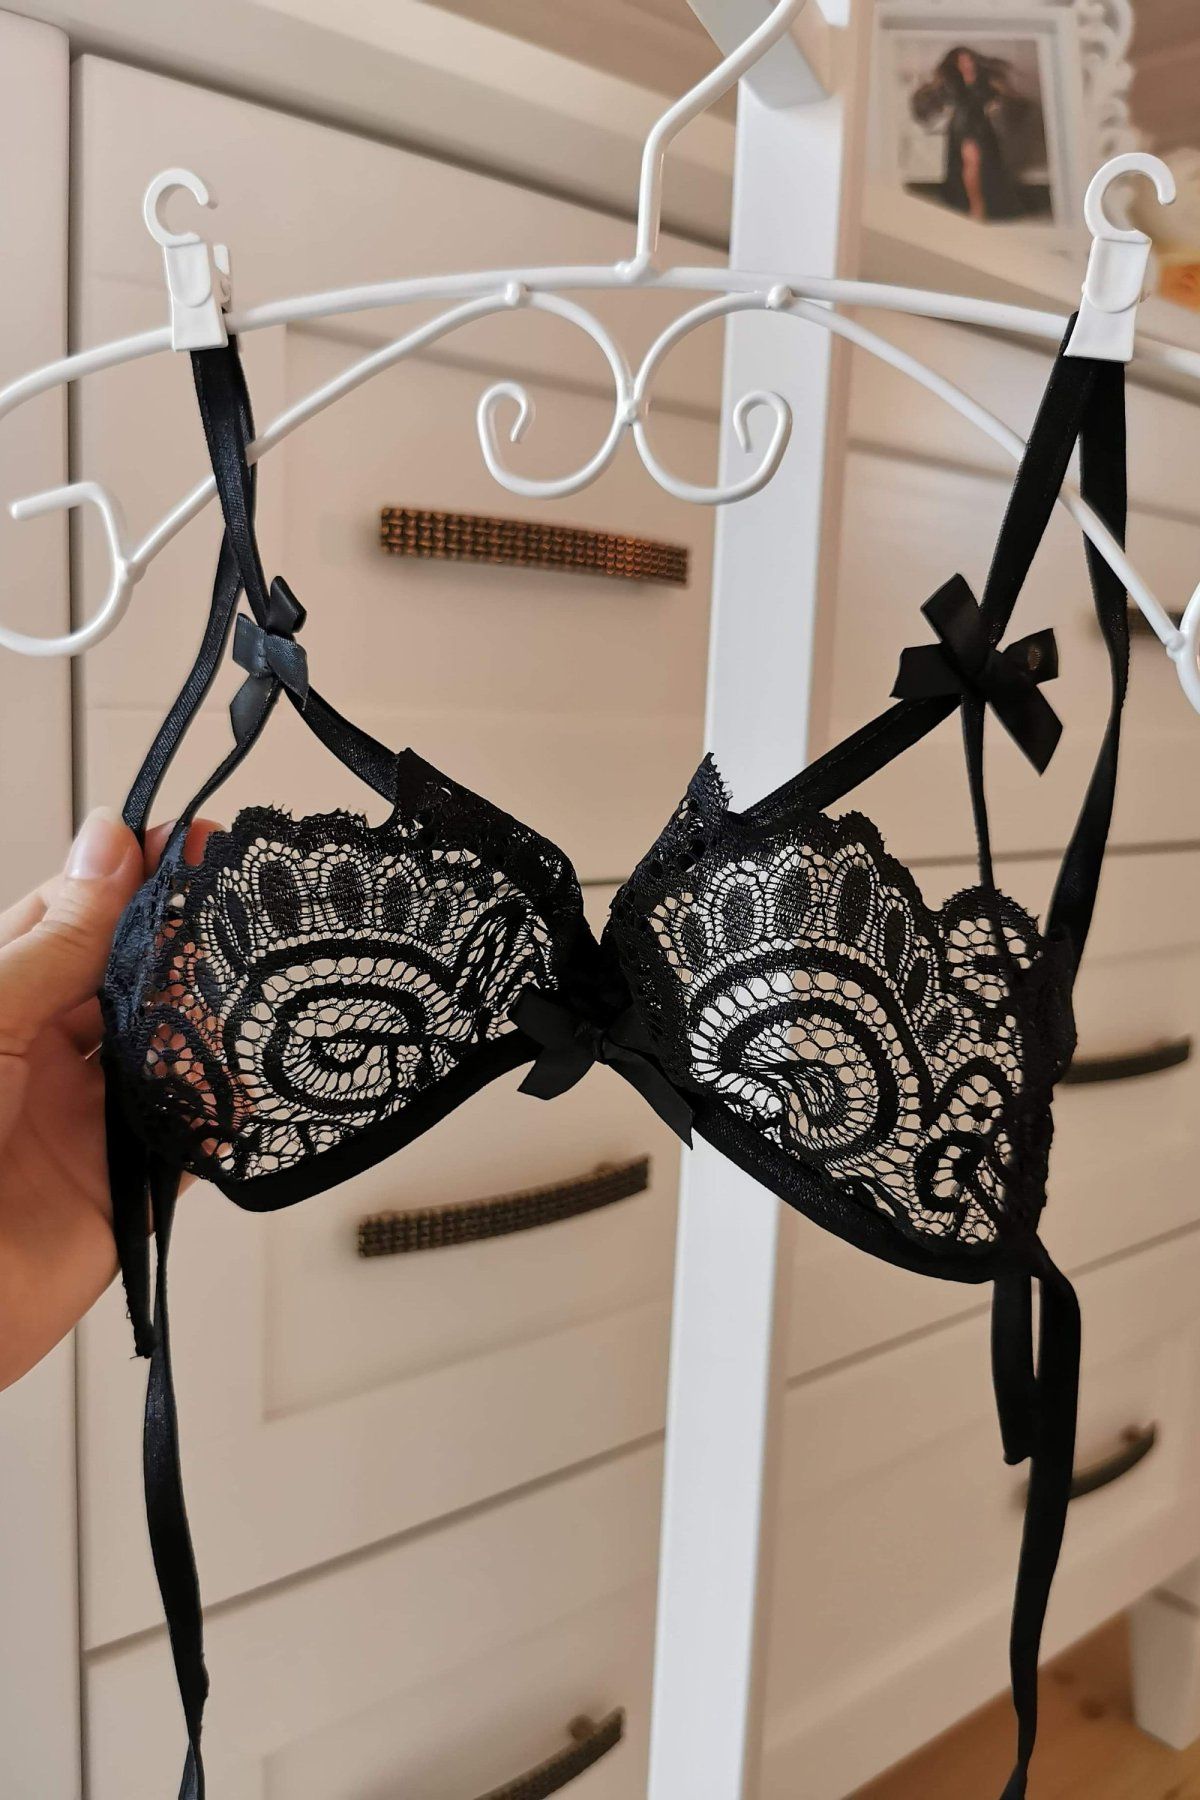 Sexy Lingerie with Intricate Lace